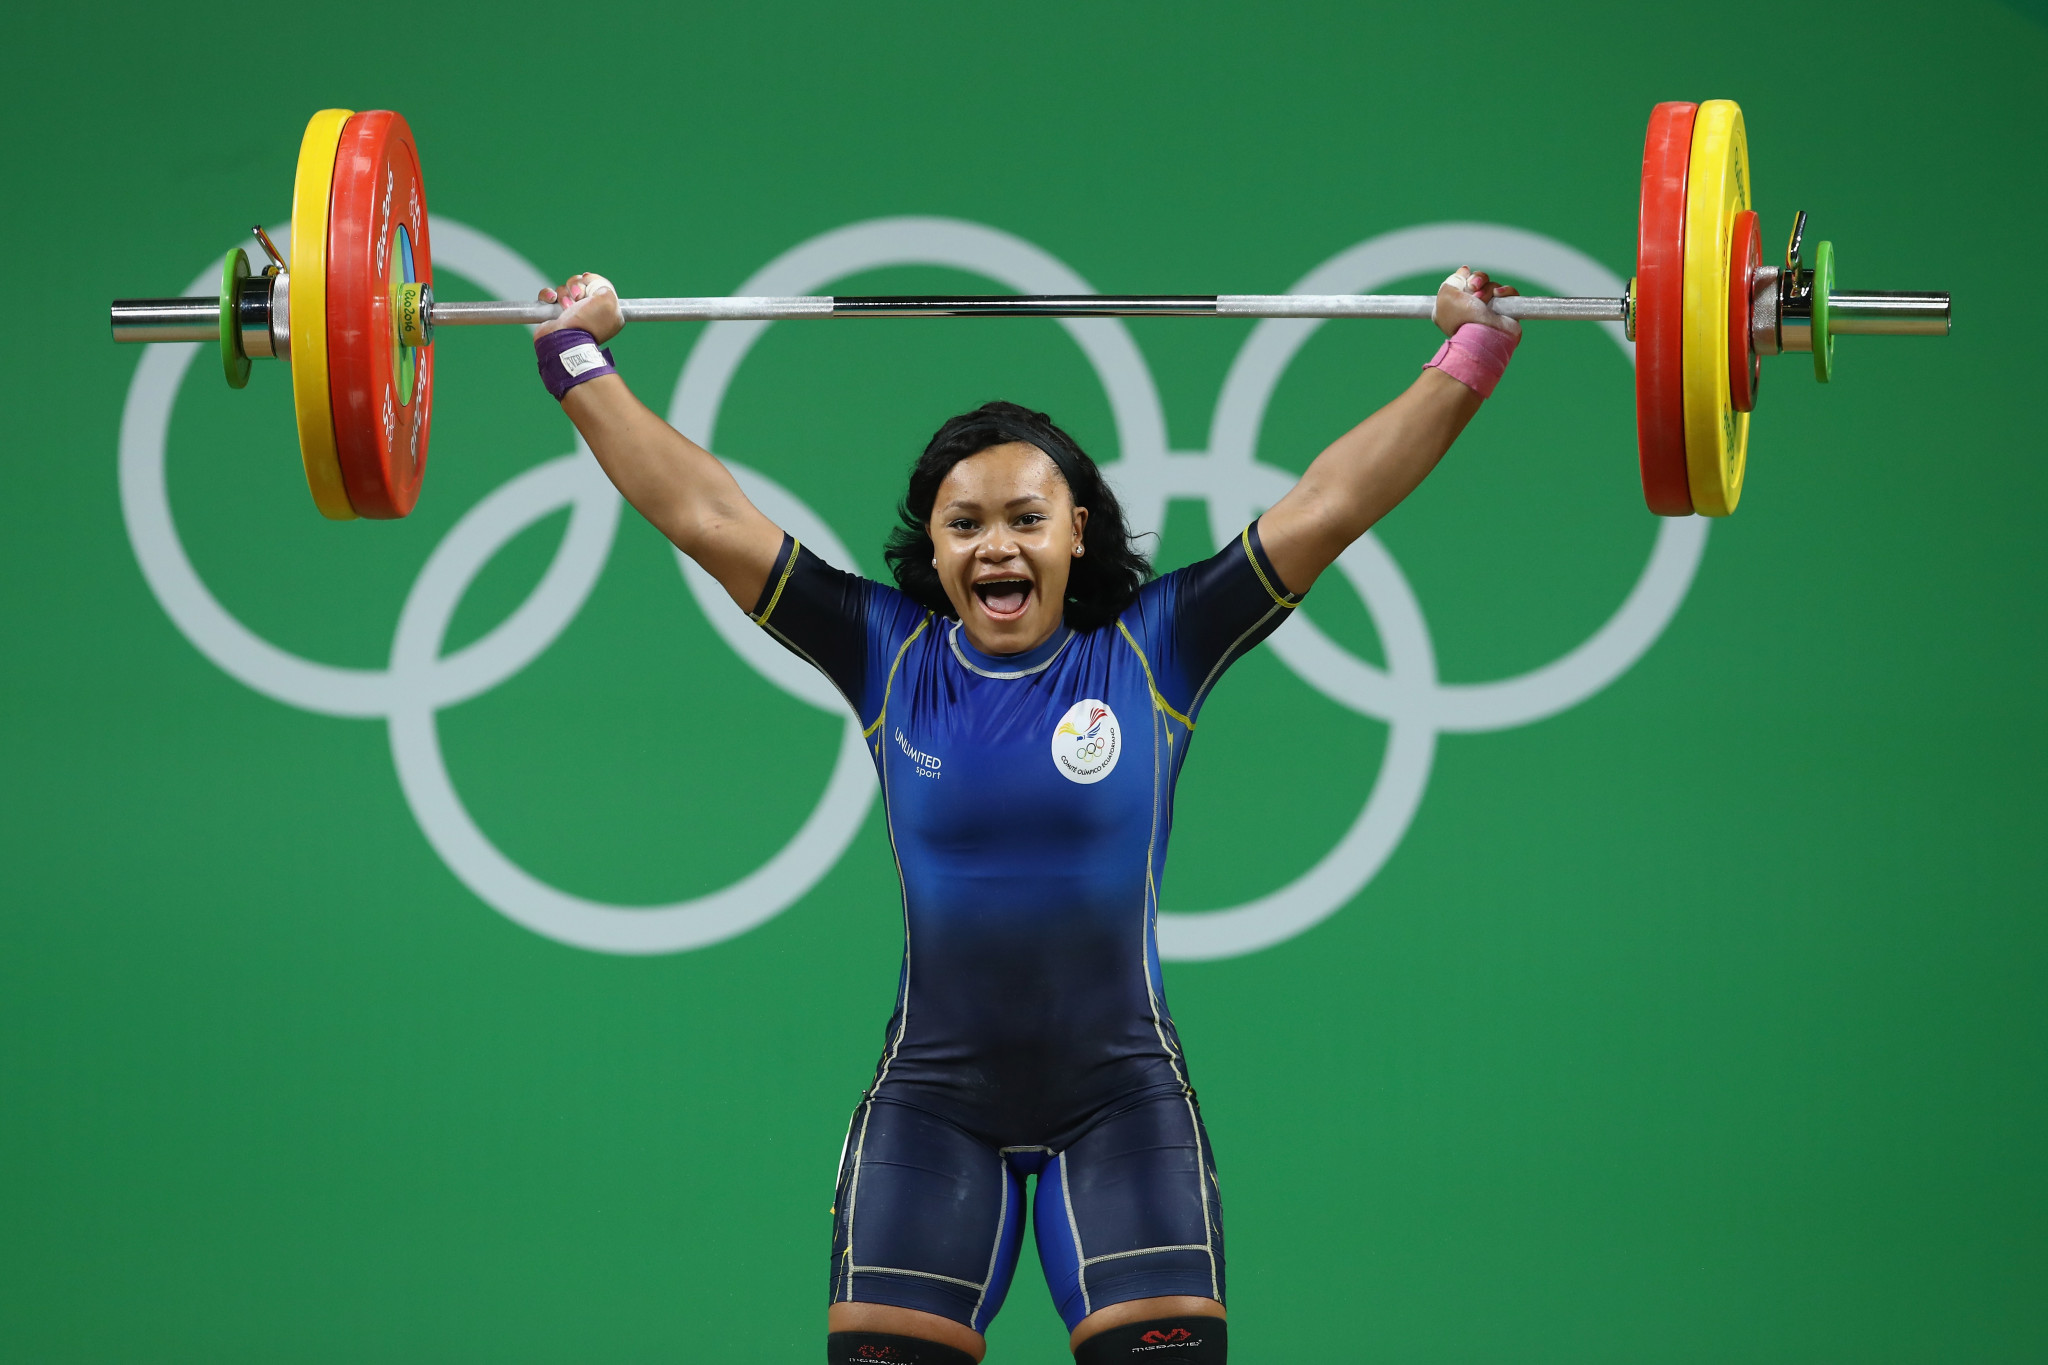 Neisi Patricia Dajomes Barrera, a Rio 2016 Olympian, won three gold medals in Tashkent ©Getty Images